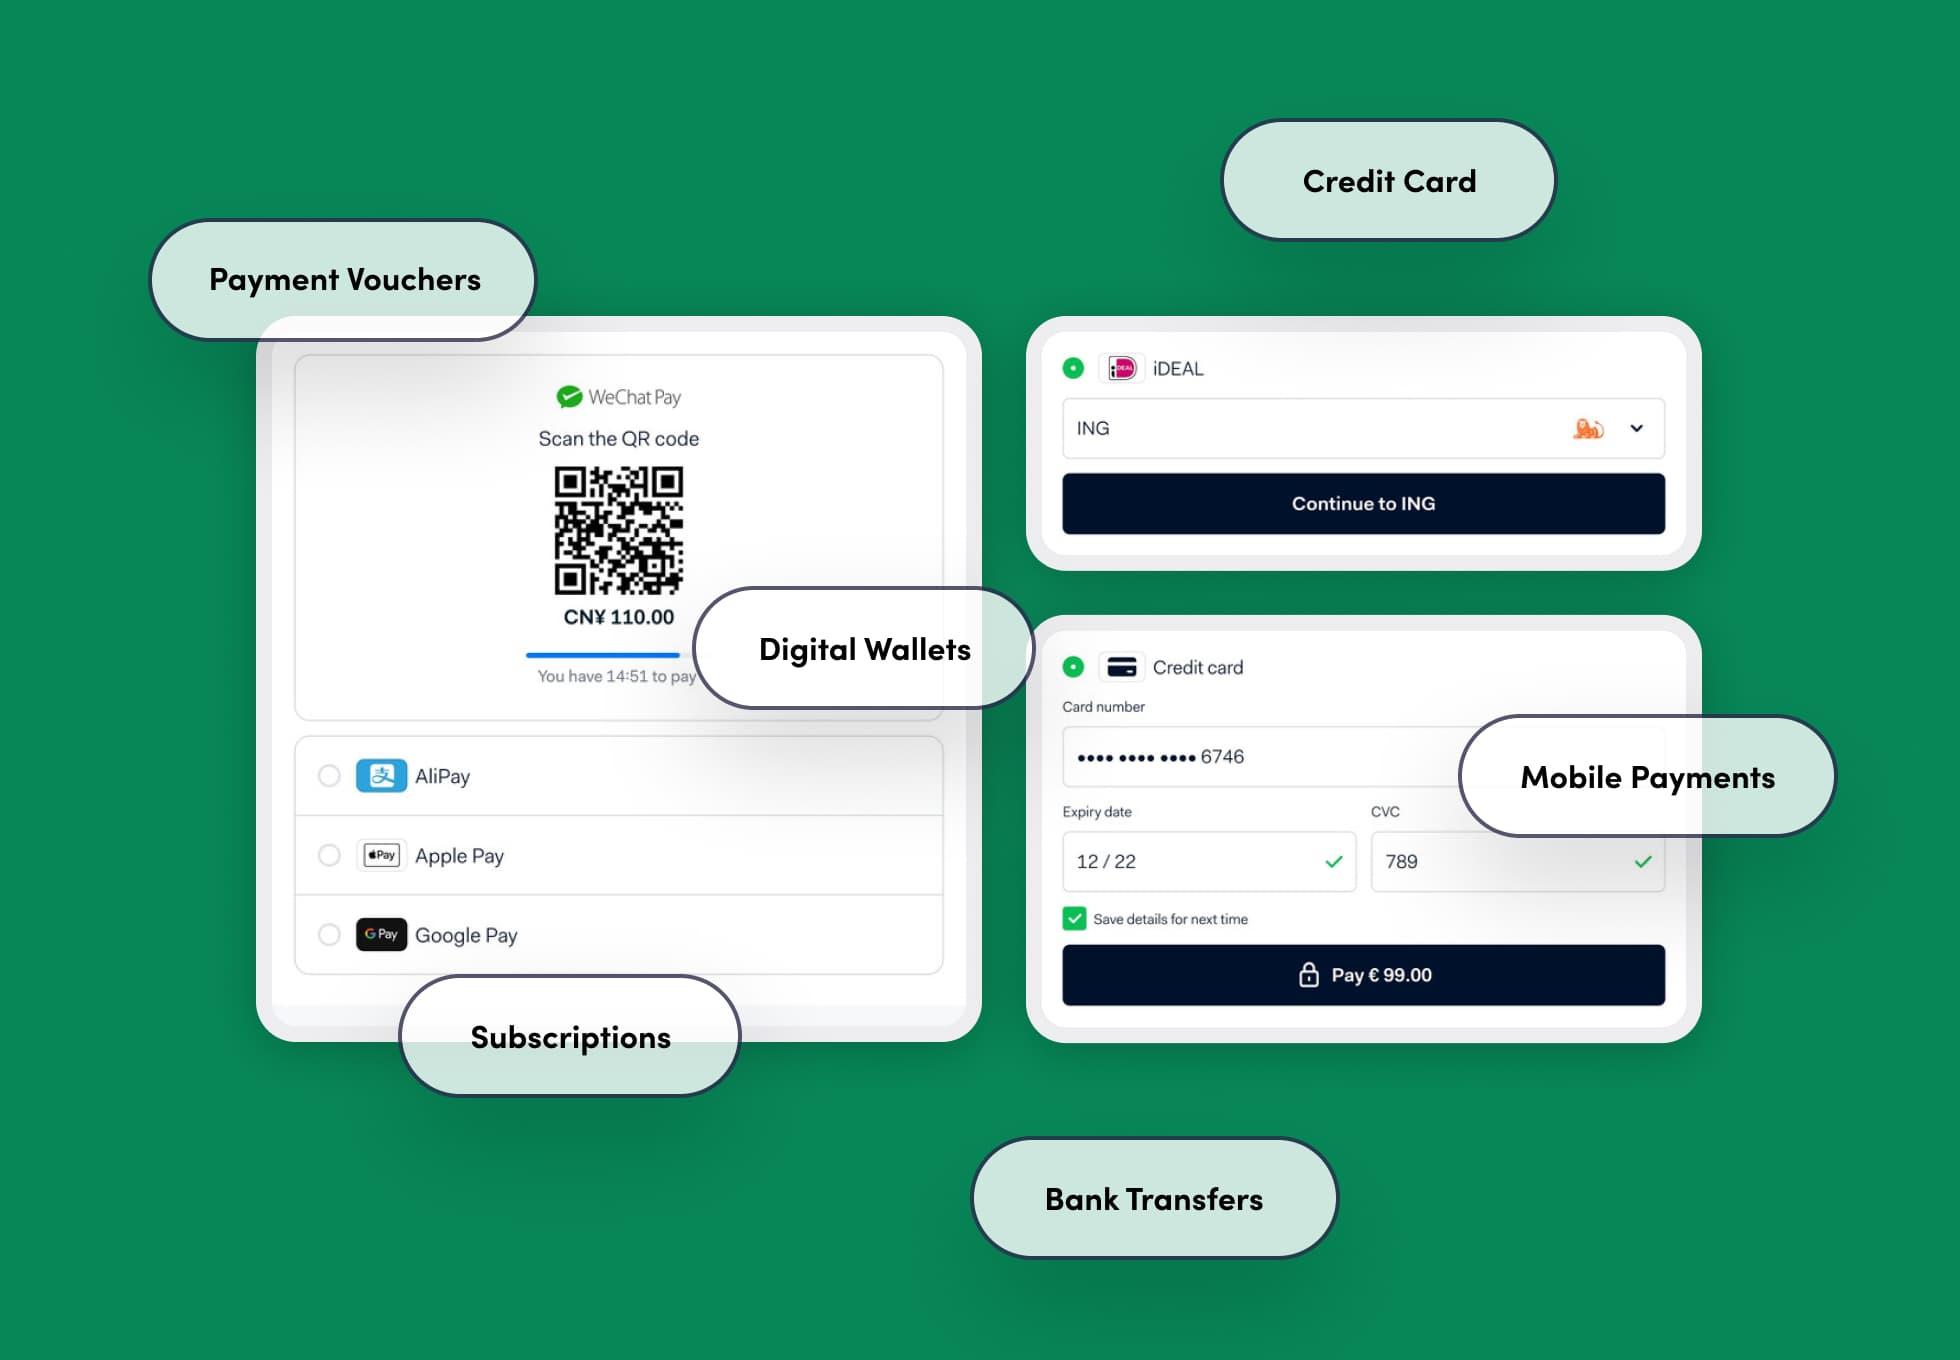 Three screenshots of a typical Ayden checkout process with words in bubbles that say: Payment vouchers, subscriptions, digital wallets, bank transfers, mobile payments, credit card.